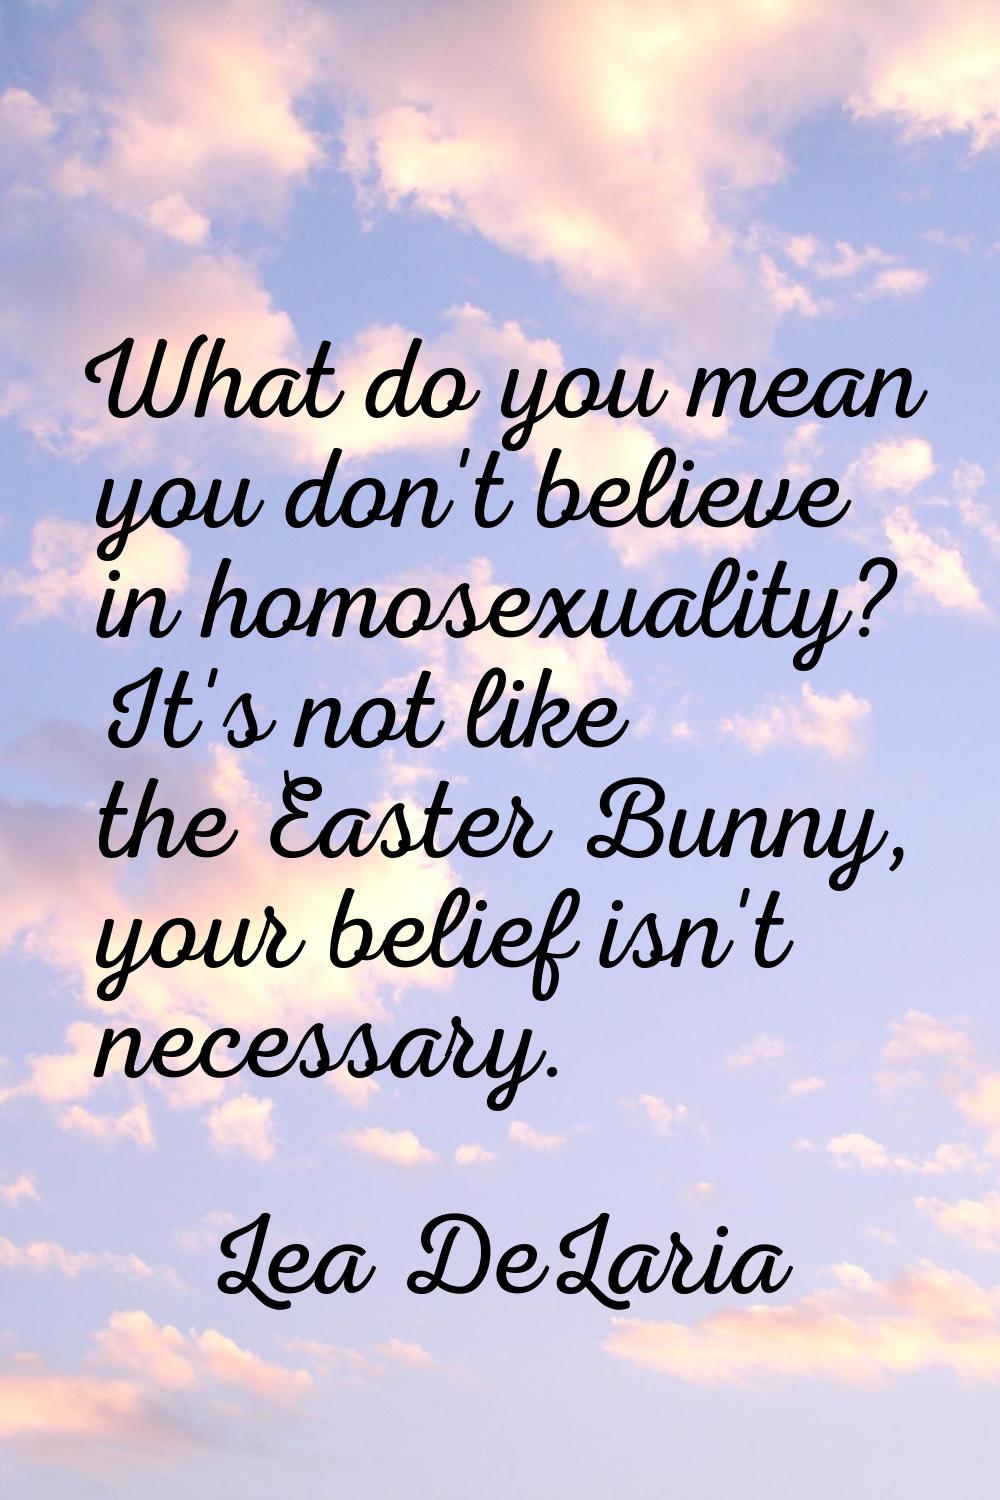 What do you mean you don't believe in homosexuality? It's not like the Easter Bunny, your belief is